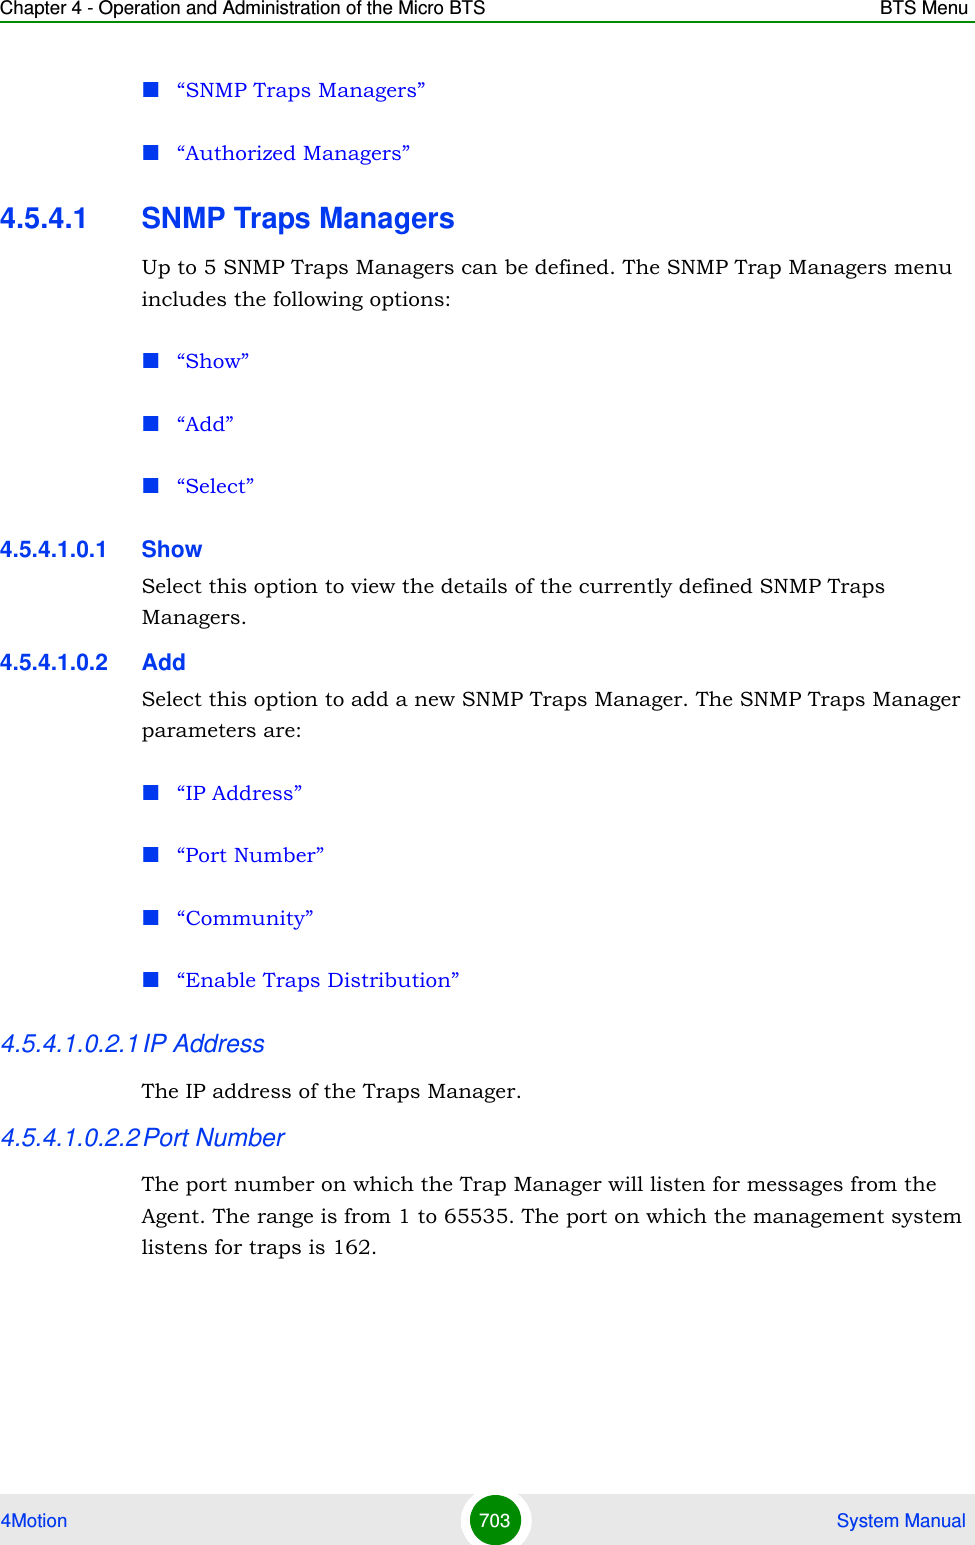 Chapter 4 - Operation and Administration of the Micro BTS BTS Menu4Motion 703  System Manual“SNMP Traps Managers”“Authorized Managers”4.5.4.1 SNMP Traps ManagersUp to 5 SNMP Traps Managers can be defined. The SNMP Trap Managers menu includes the following options:“Show”“Add”“Select”4.5.4.1.0.1 ShowSelect this option to view the details of the currently defined SNMP Traps Managers.4.5.4.1.0.2 AddSelect this option to add a new SNMP Traps Manager. The SNMP Traps Manager parameters are:“IP Address”“Port Number”“Community”“Enable Traps Distribution”4.5.4.1.0.2.1IP AddressThe IP address of the Traps Manager.4.5.4.1.0.2.2Port NumberThe port number on which the Trap Manager will listen for messages from the Agent. The range is from 1 to 65535. The port on which the management system listens for traps is 162.